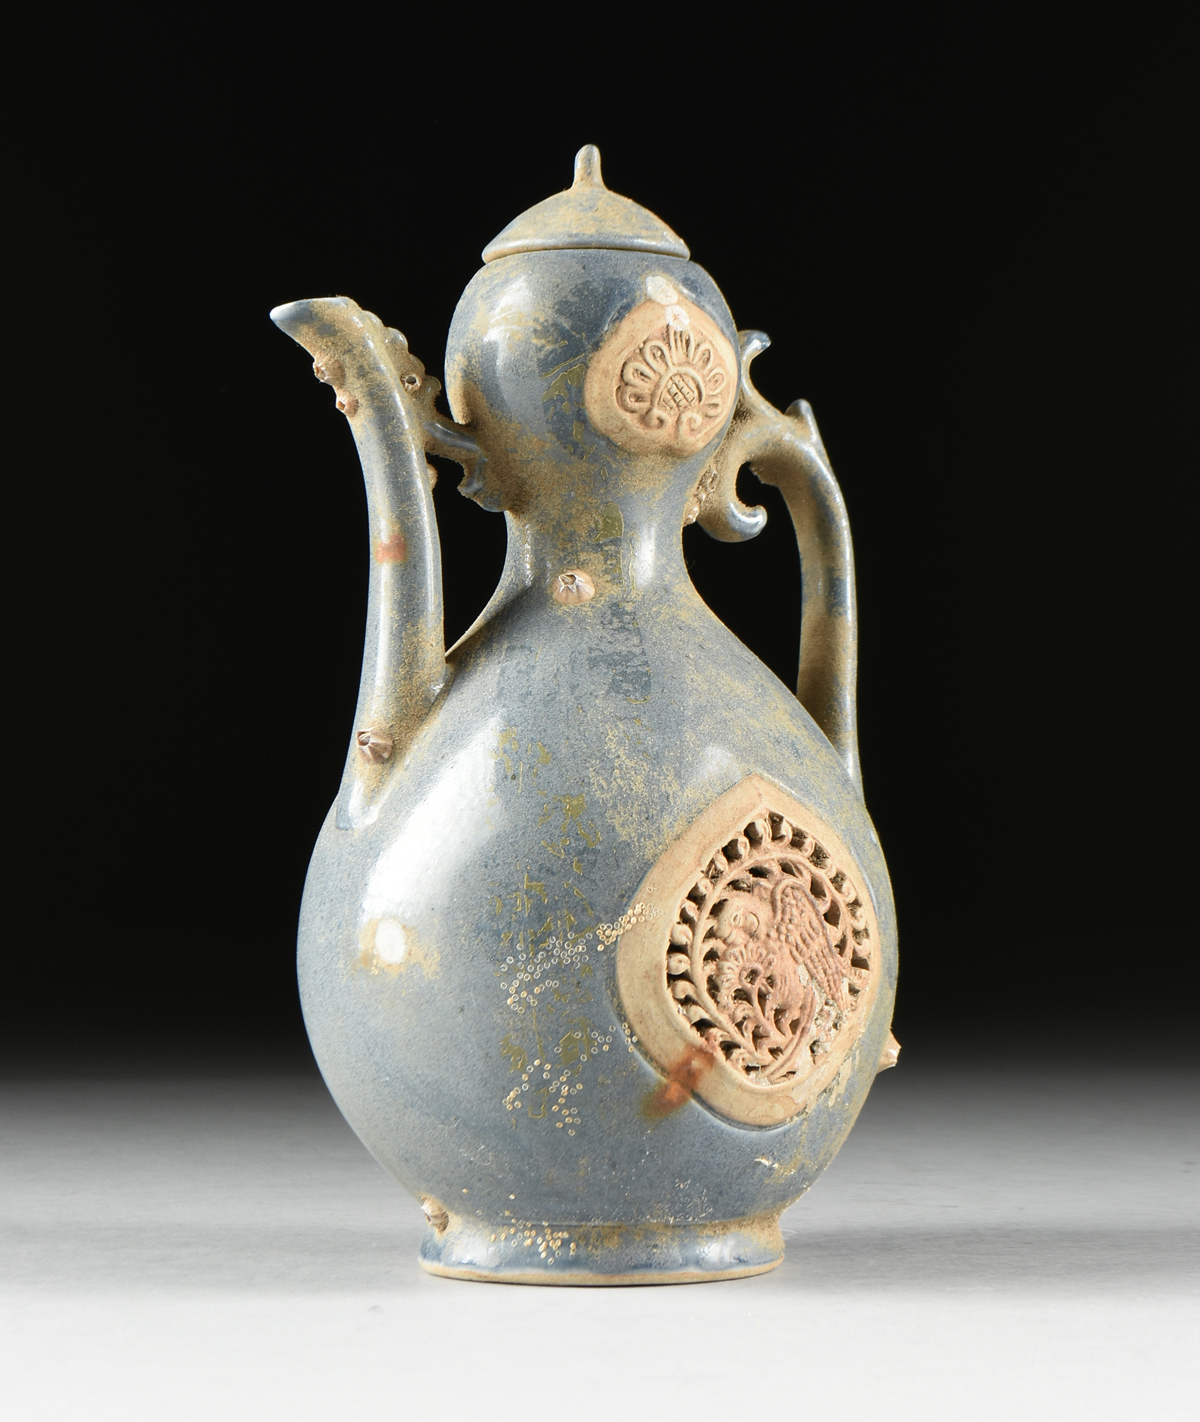 A VIETNAMESE/ANNAMESE BLUE GLAZED DOUBLE GOURD PORCELAIN EWER, SHIPWRECK ARTIFACT, 15TH/16TH - Image 6 of 11